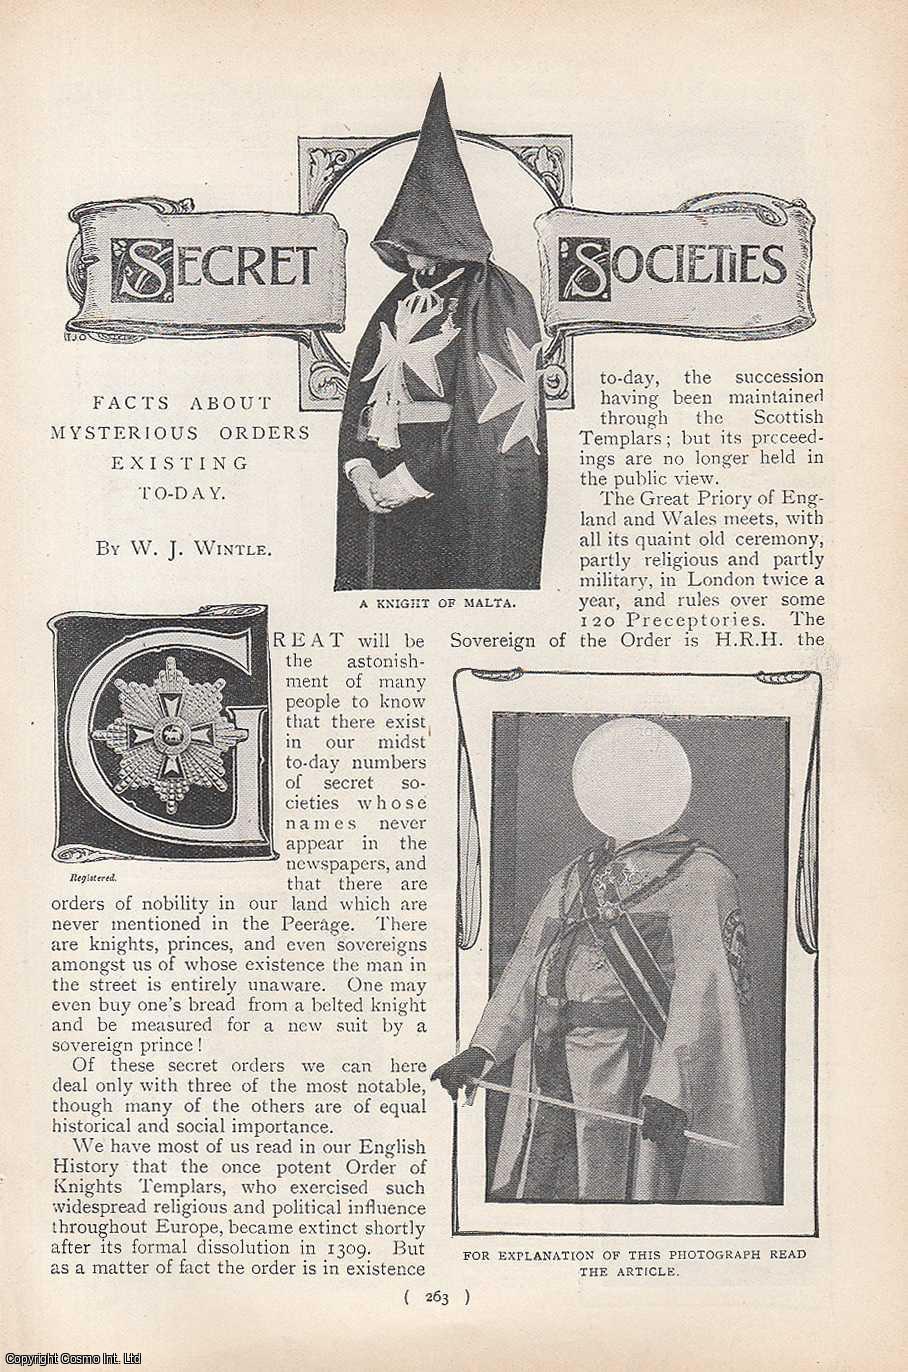 W.J. Wintle - The Cross of A Knight of Malta ; Stars of A Knight Commander of The Temple ; A Sovereign Prince Rose Croix of Heredom & more : Secret Societies. Facts About Mysterious Orders Existing To-Day. An uncommon original article from the Harmsworth London Magazine, 1901.